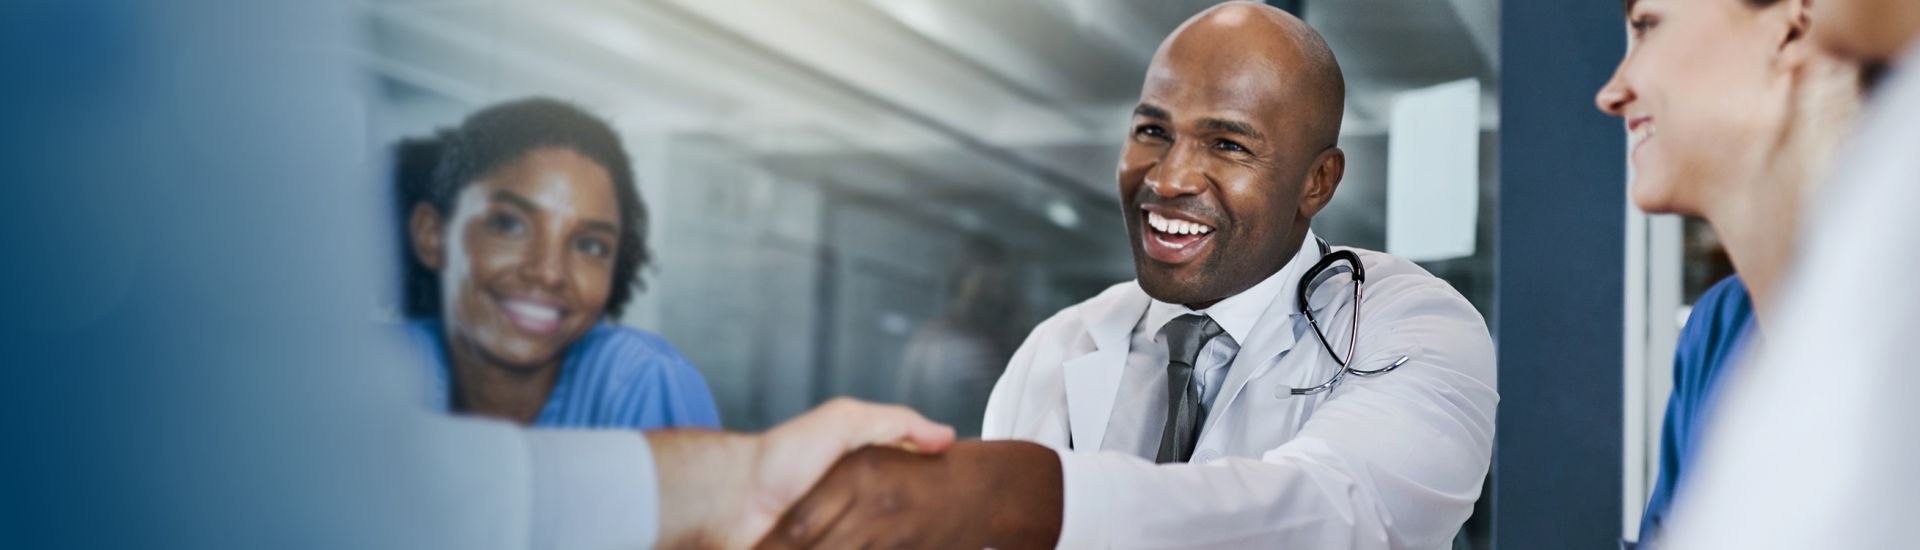 providers shaking hands with new hires